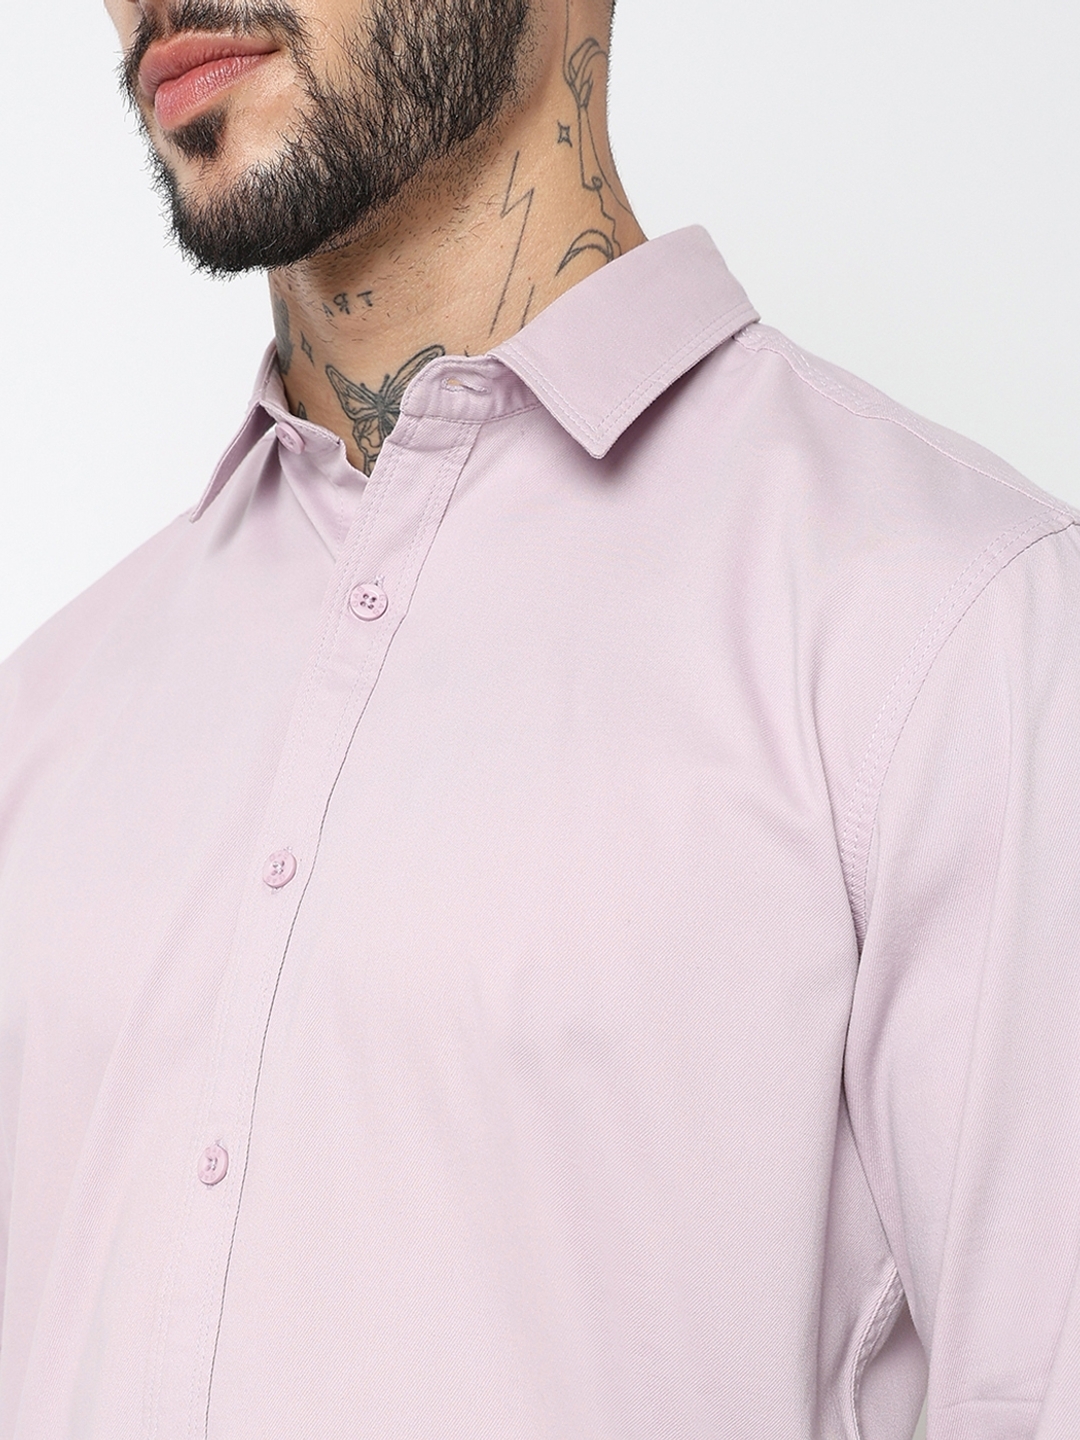 Relaxed Fit Full Sleeve Solid Twill Shirts